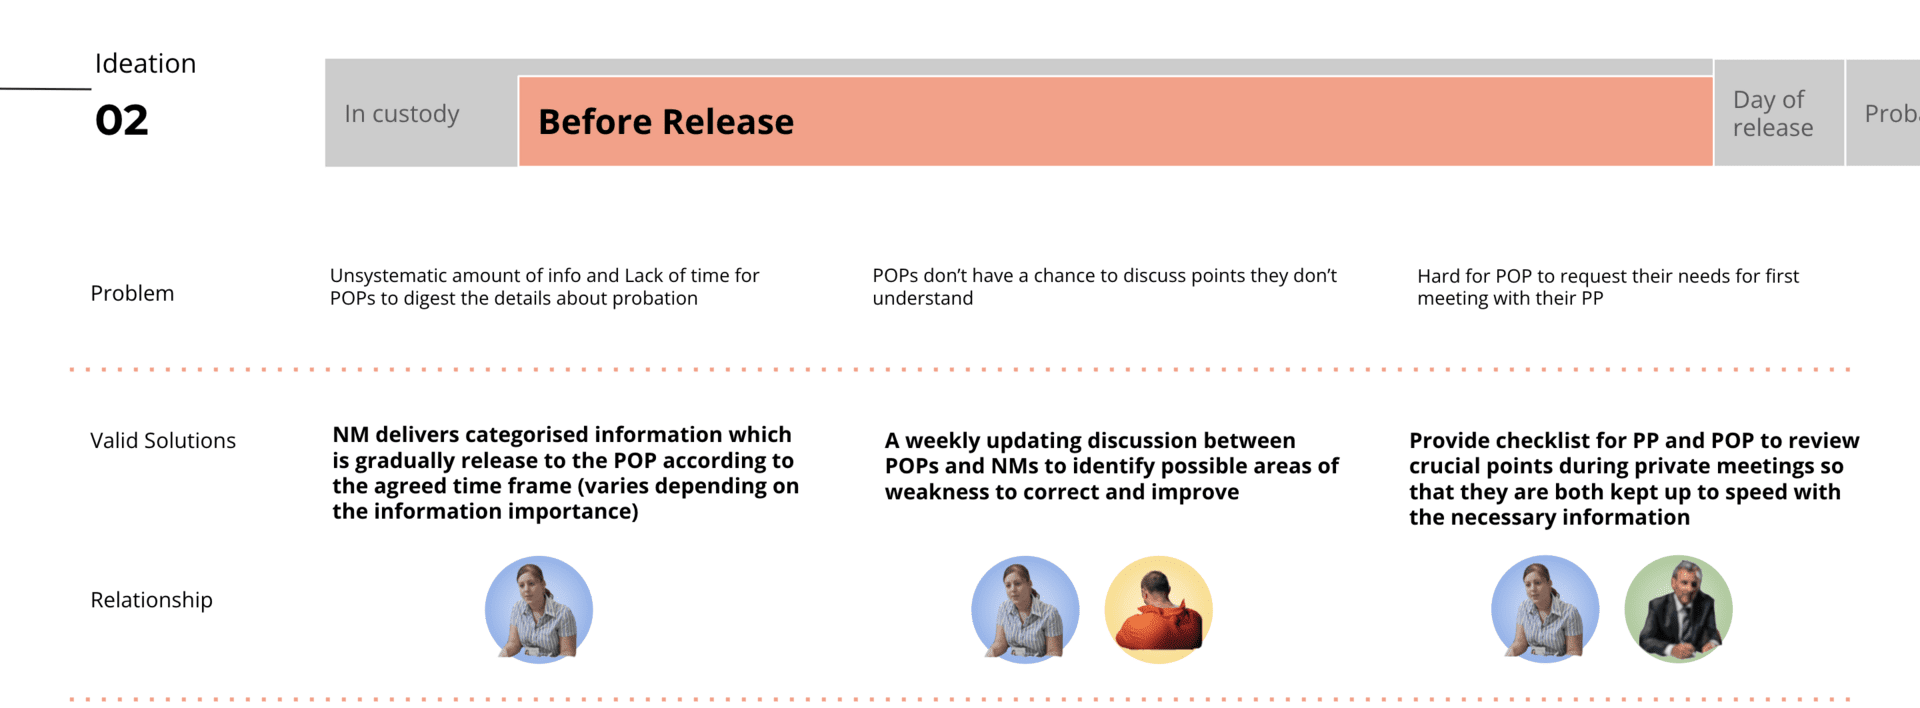 Guideline Package 2: Before Release — Package 2 aims to help people be prepared before they are released. In the existing system, everyone has limited time to properly digest the complex information t